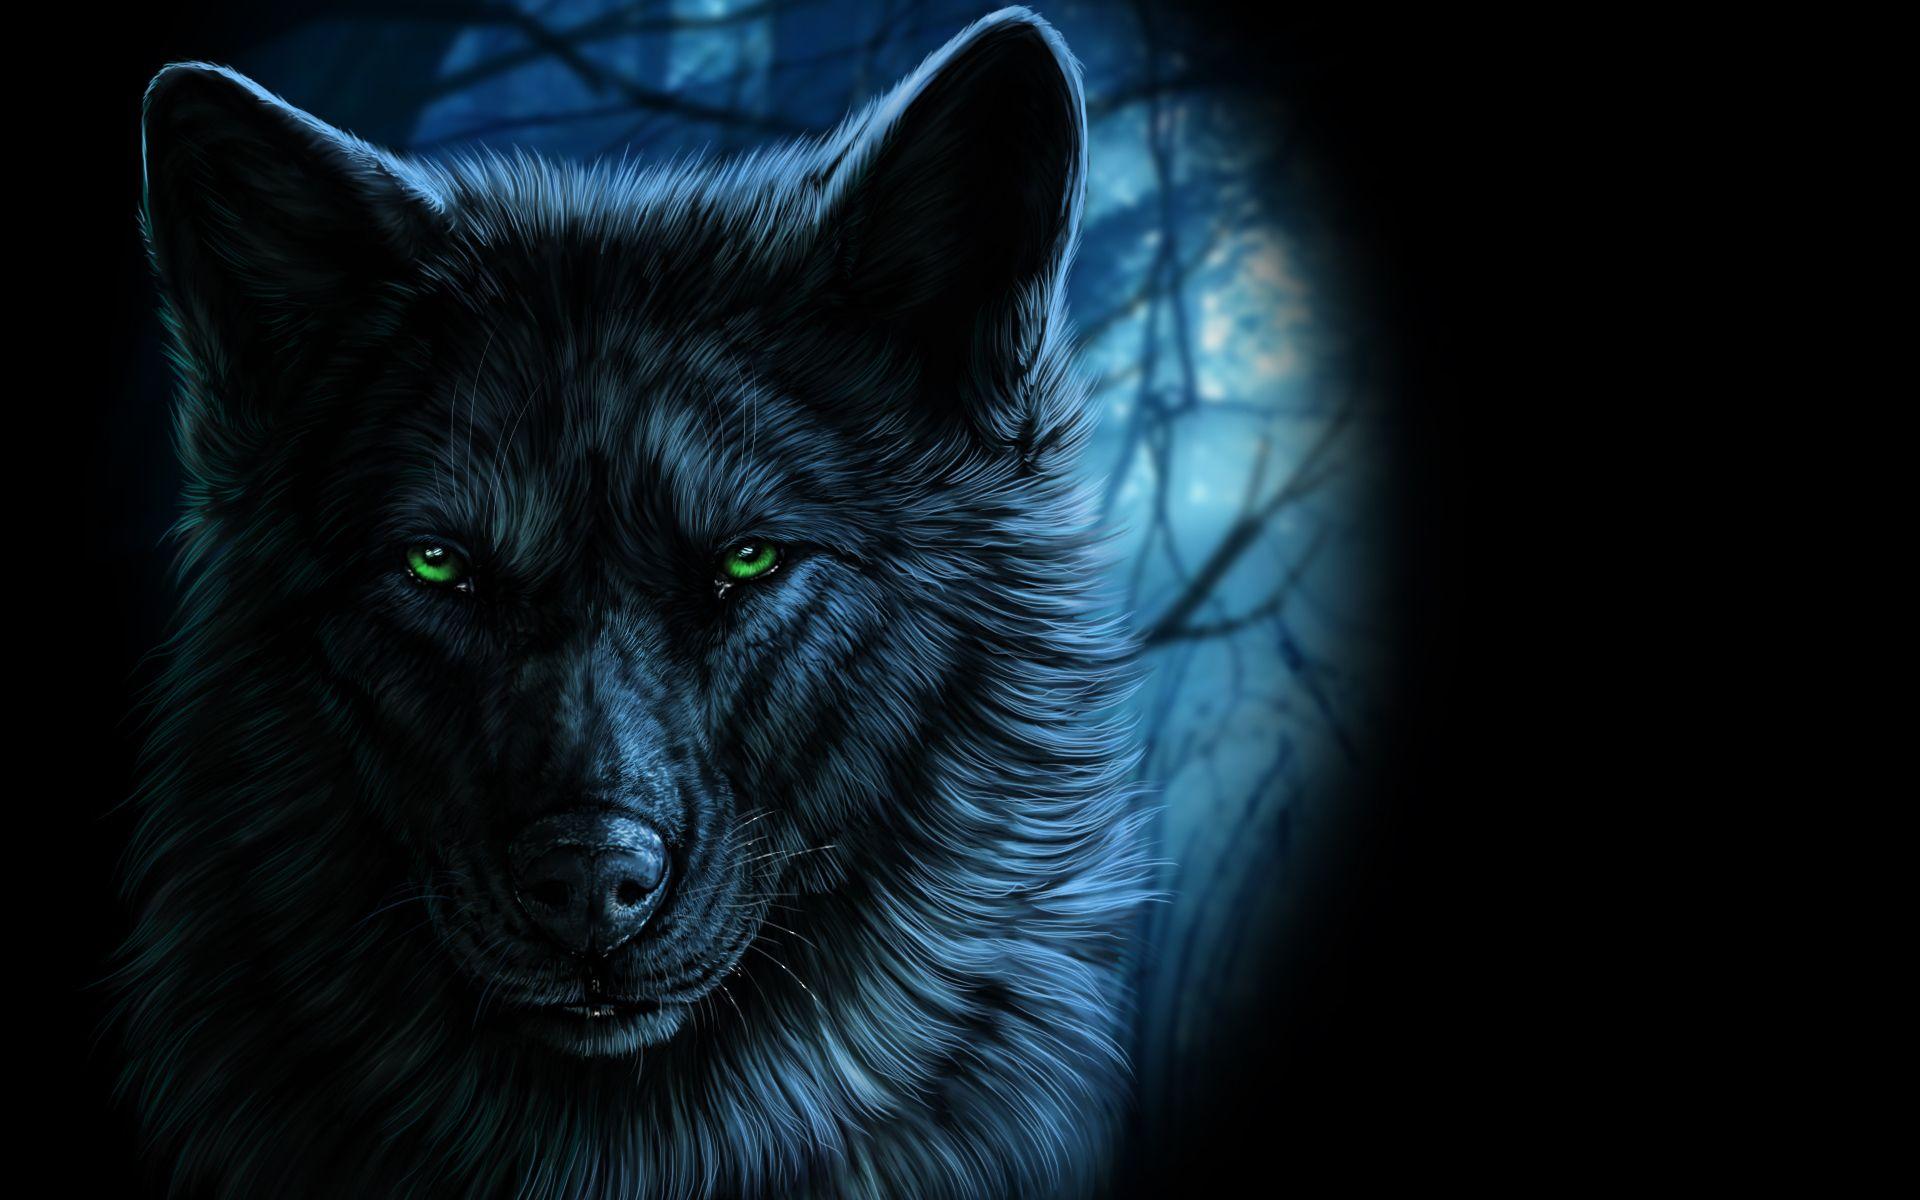 Fantasy Portrait Of Wolf With Green Eyes In The Dark By Wolfroad